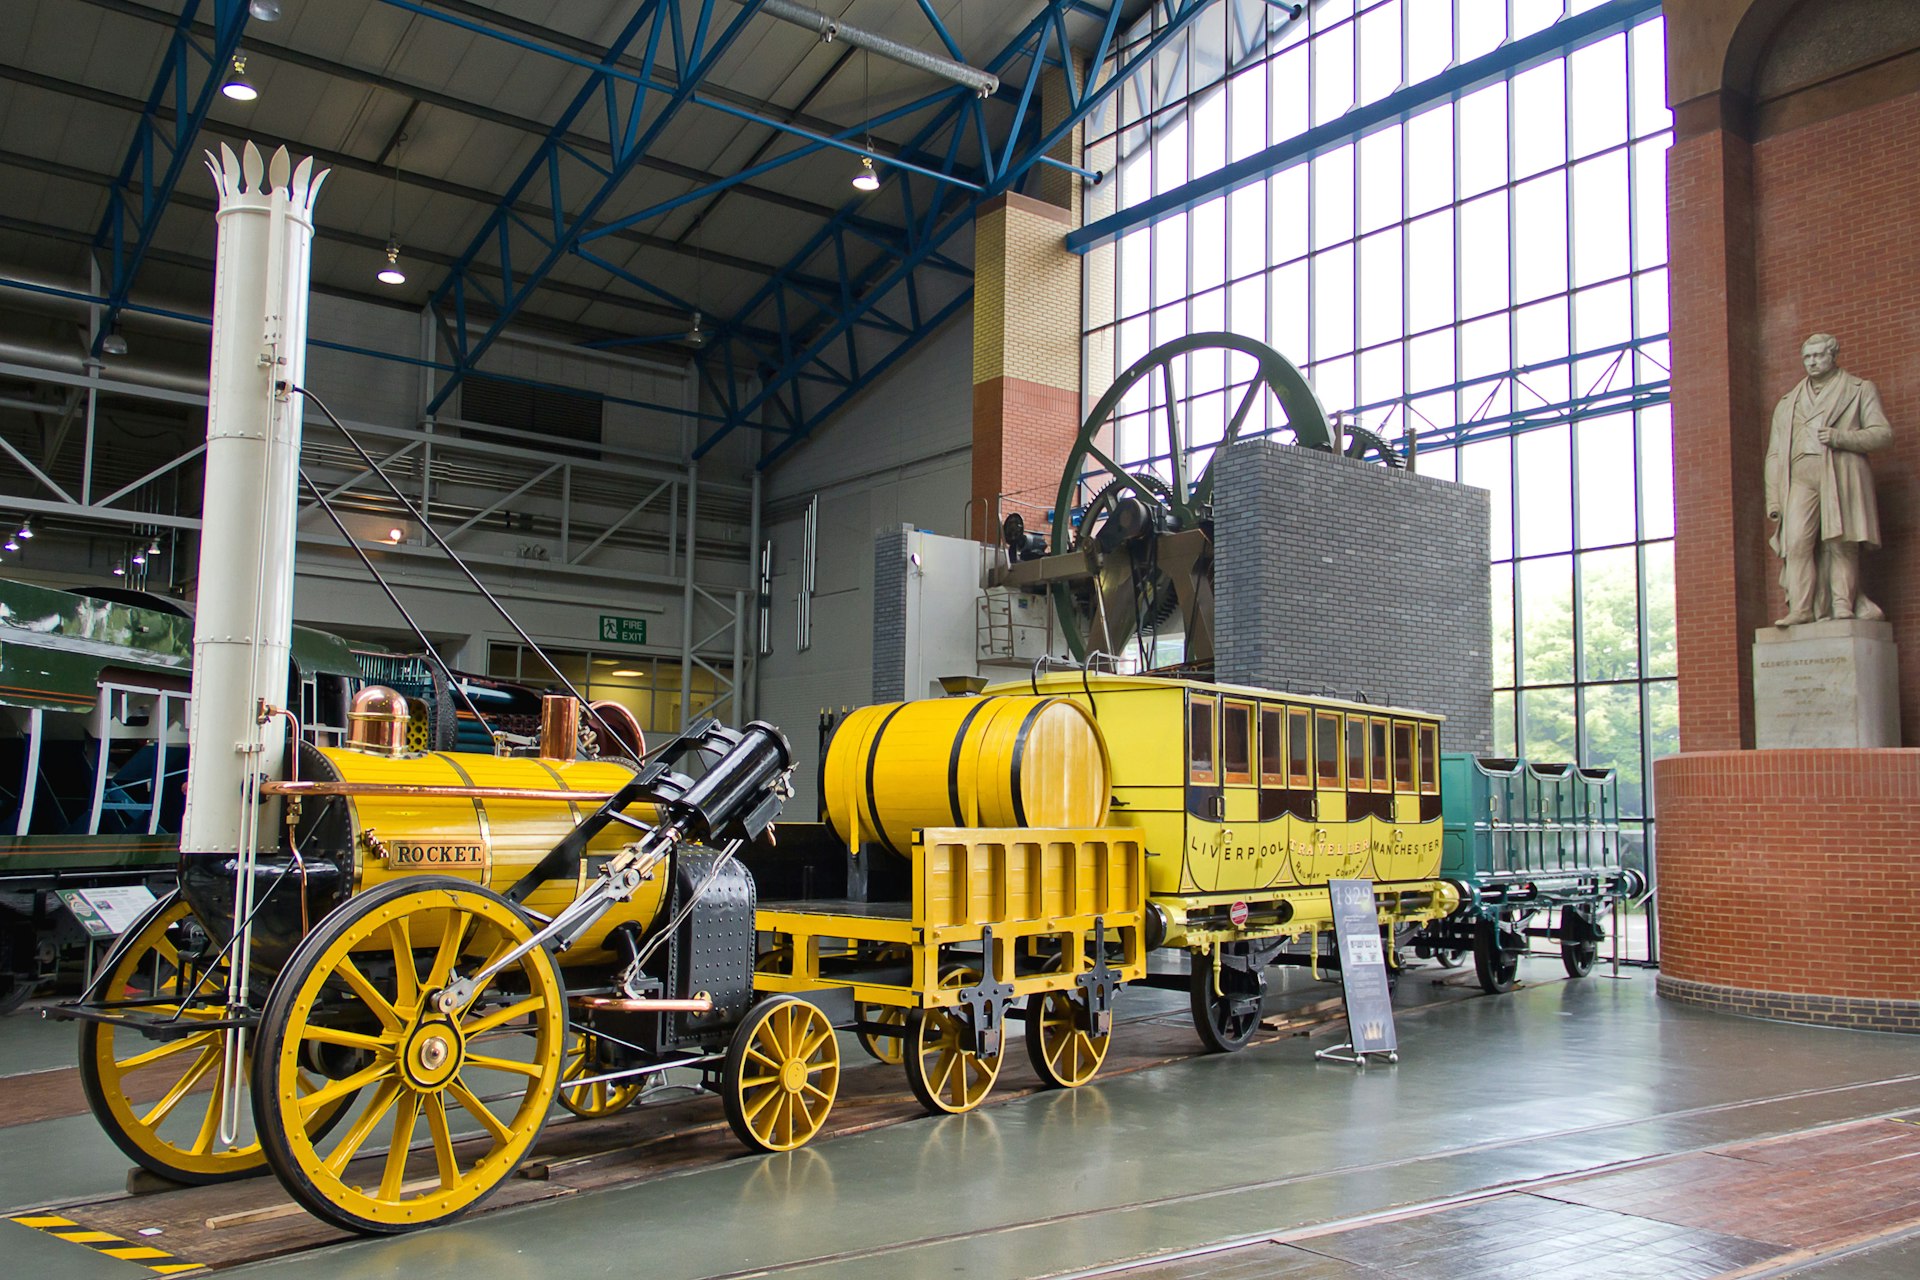 Yellow steam locomotive on display at the National Railway Museum in York